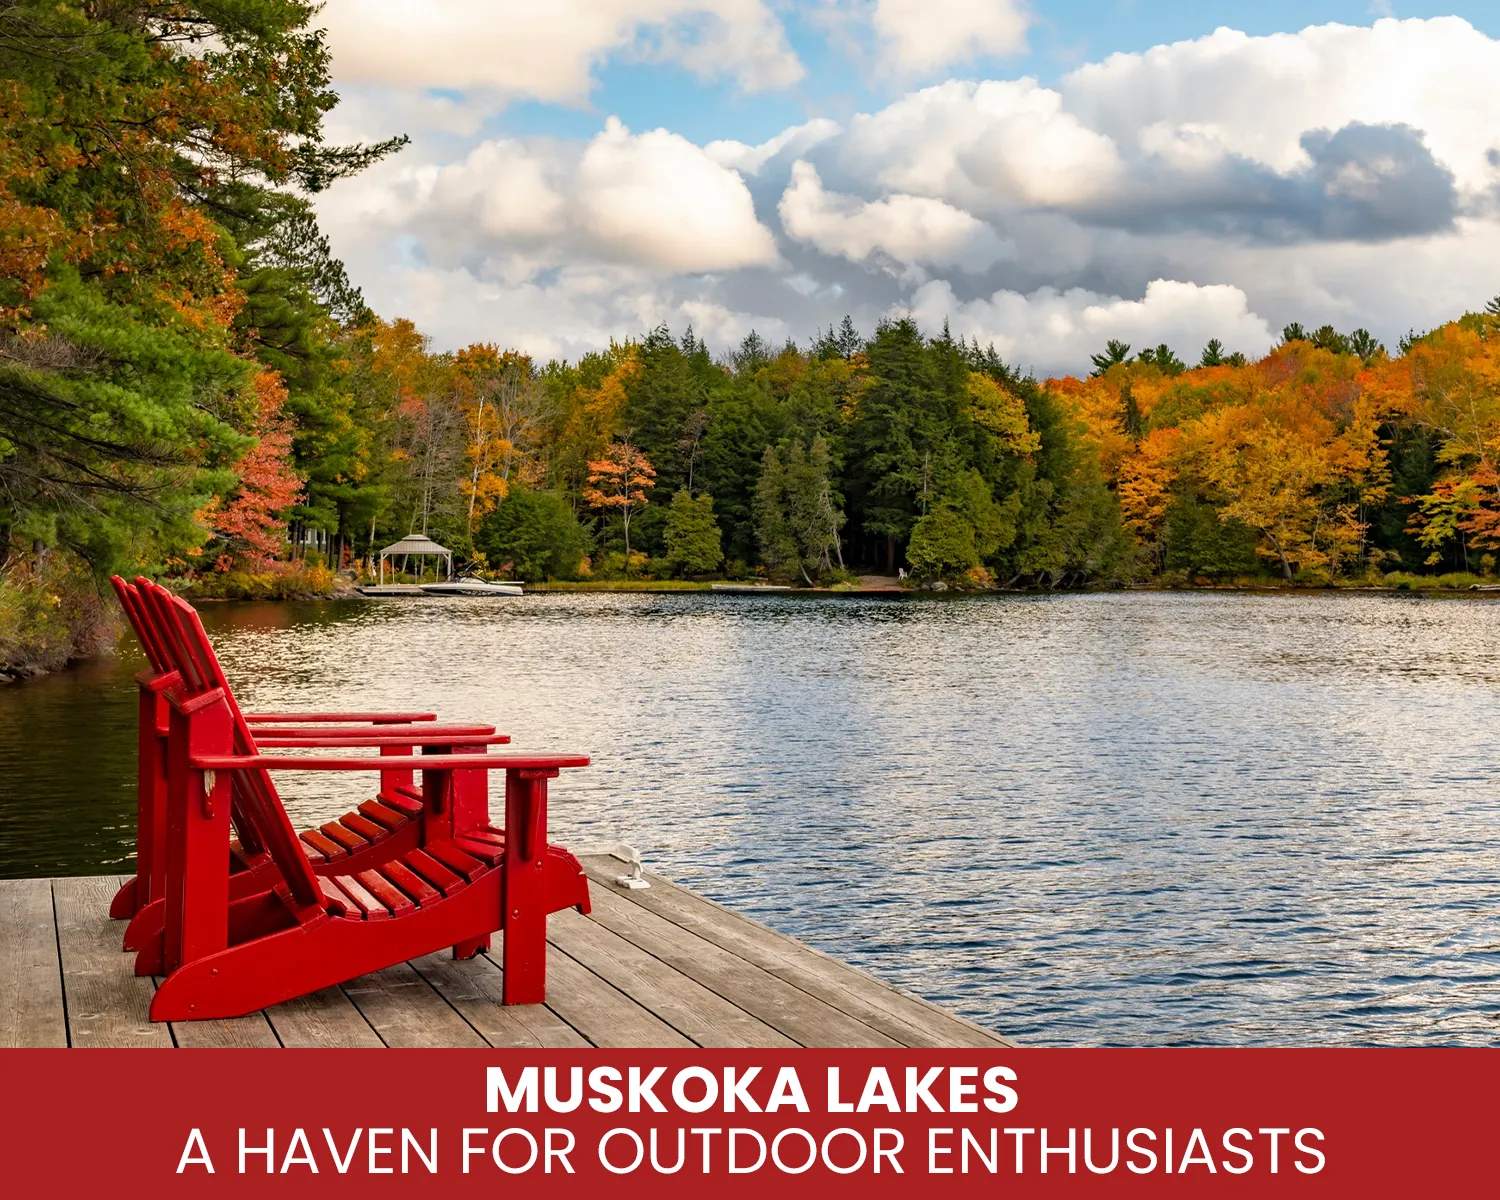 Muskoka Lakes: A Haven for Outdoor Enthusiasts